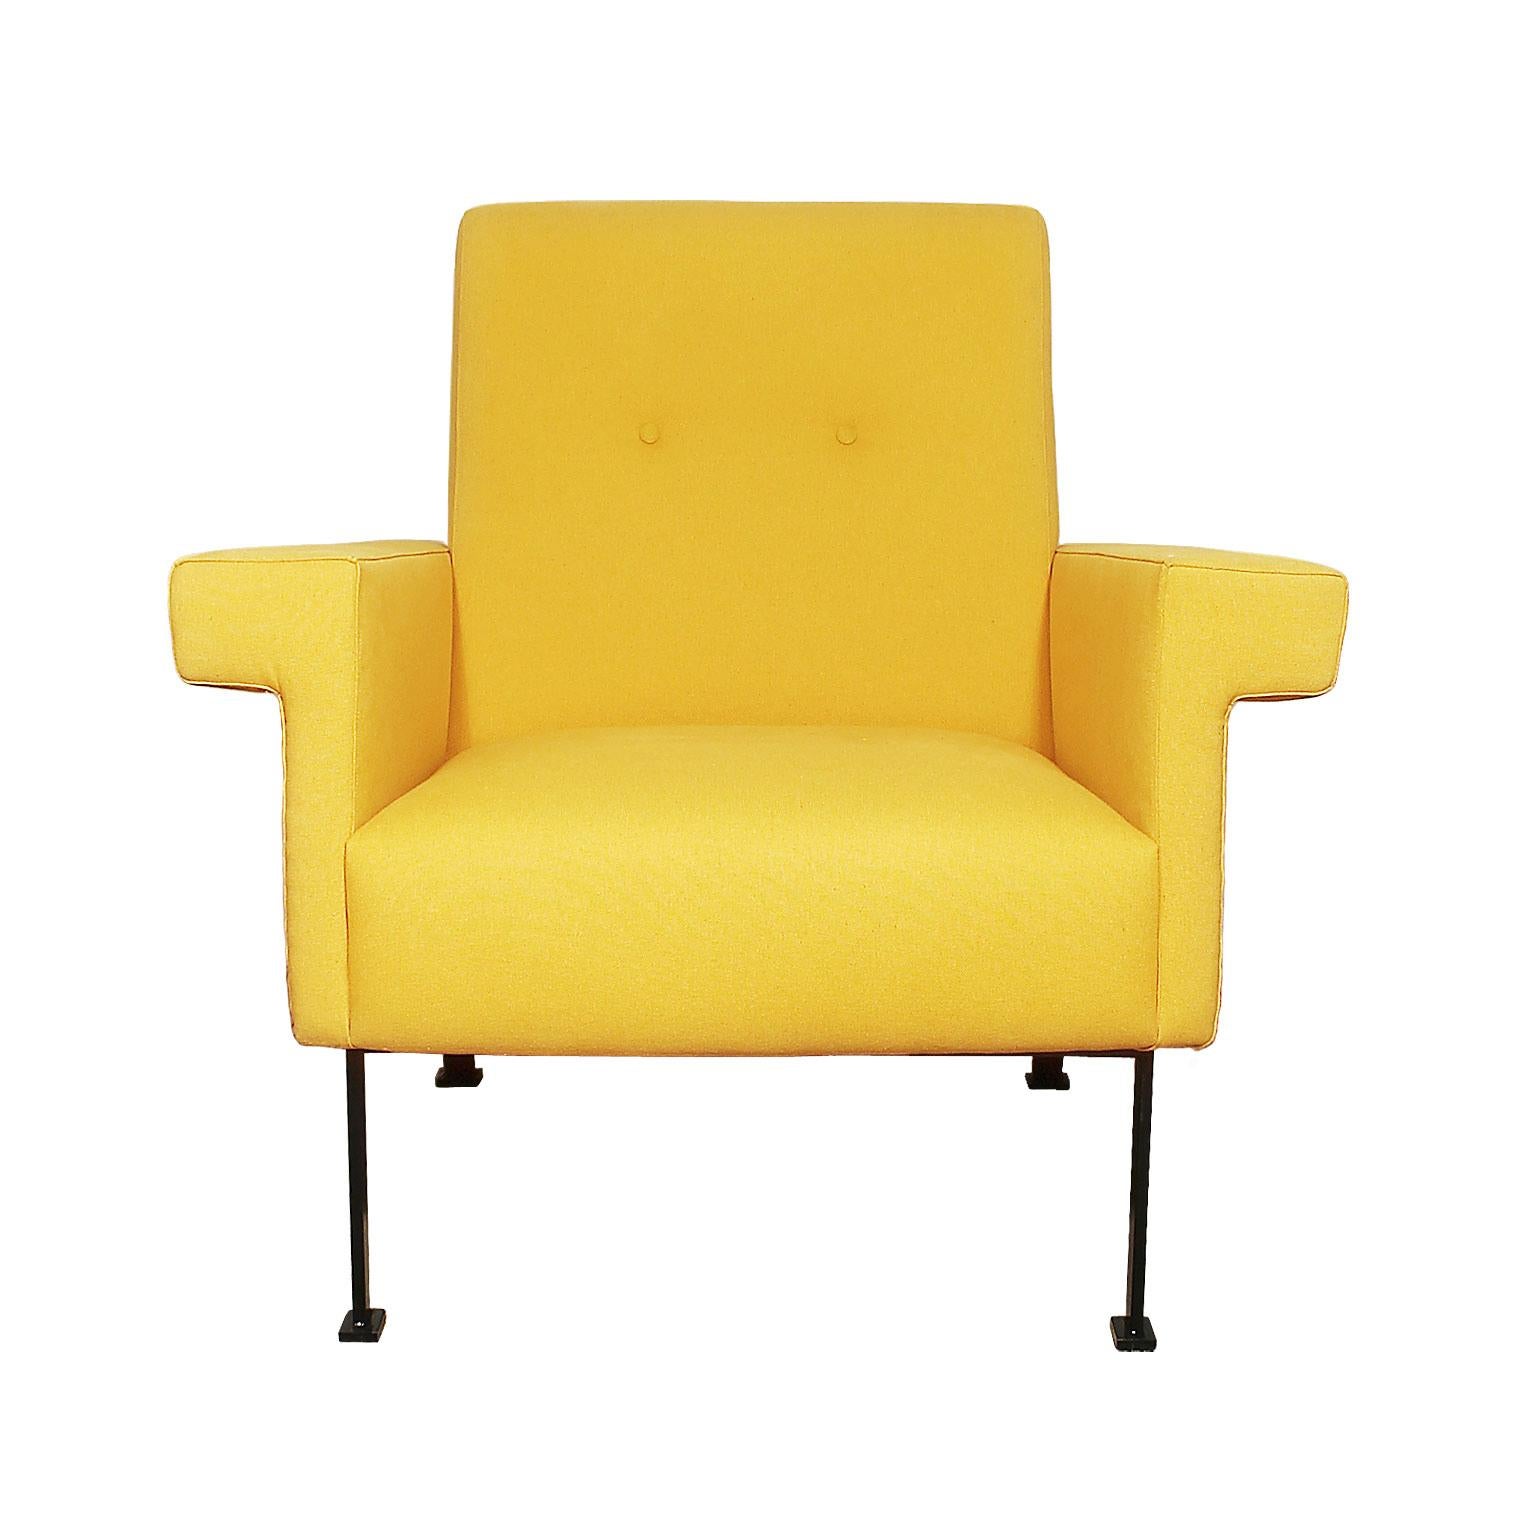 Mid-Century Modern 1960s Pair of Cubist Armchairs, Wrought Iron, Yellow Cotton Upholstery, Italy